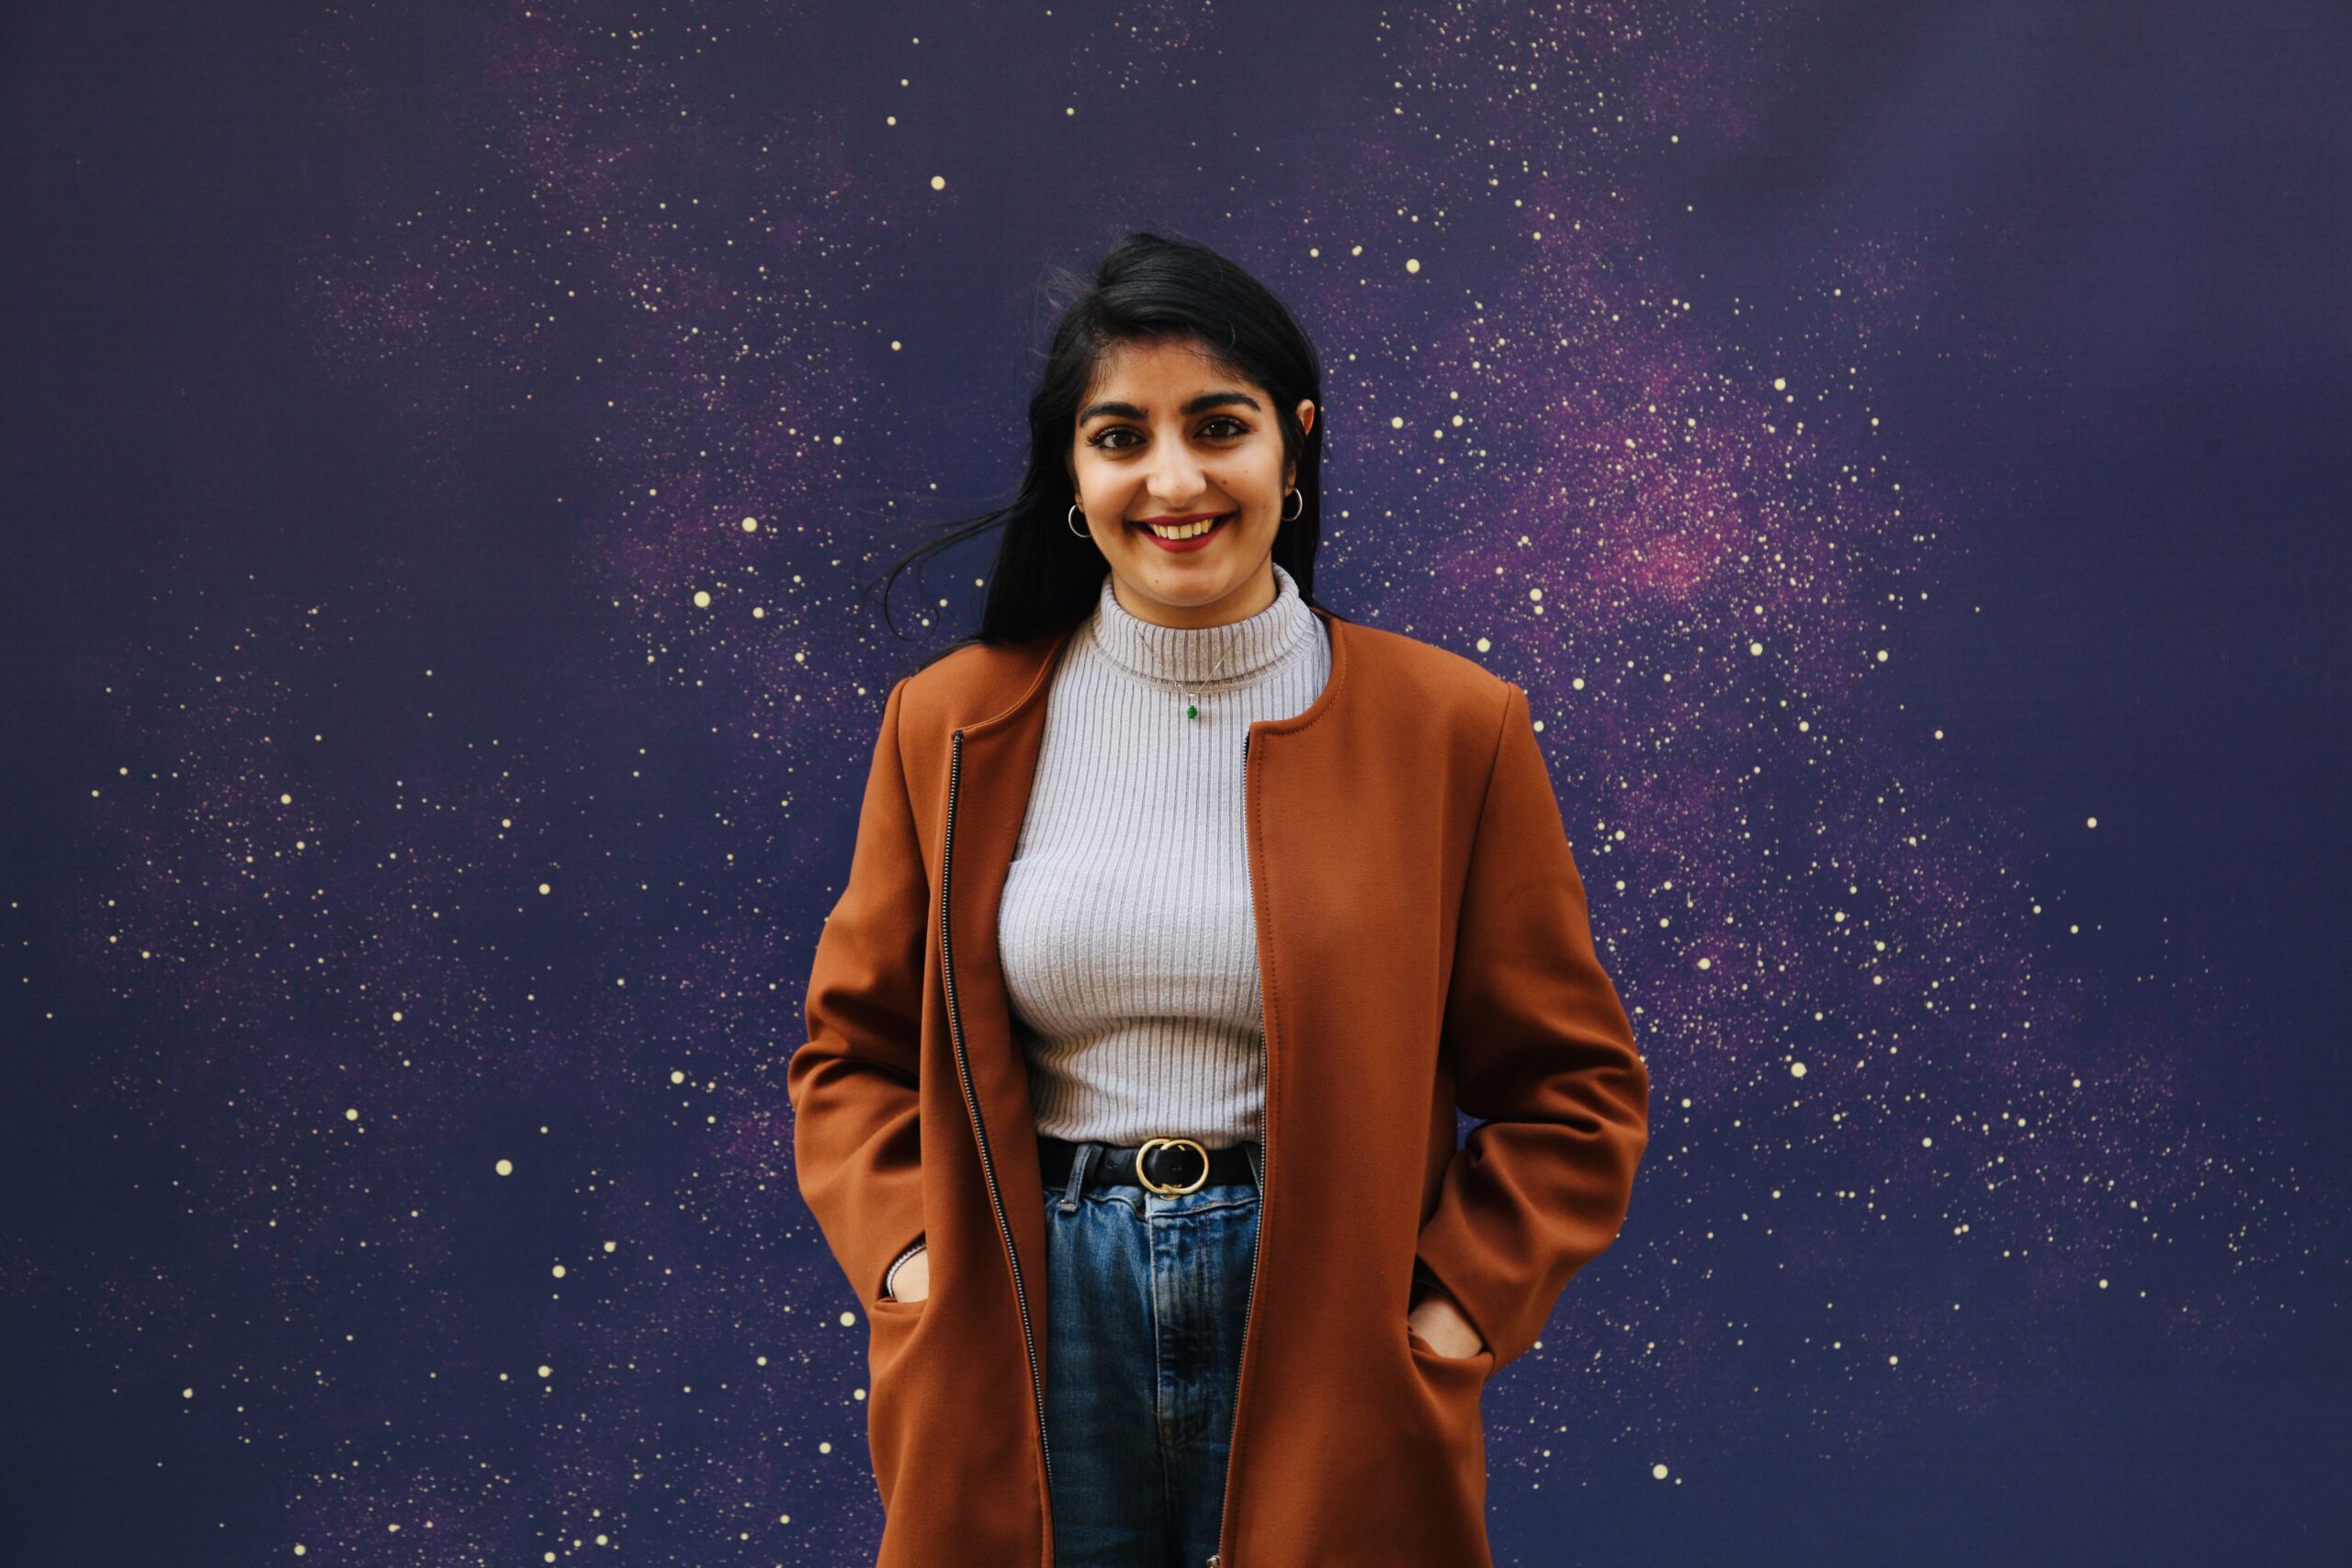 Photo of Ashni Lakhani against a starry background